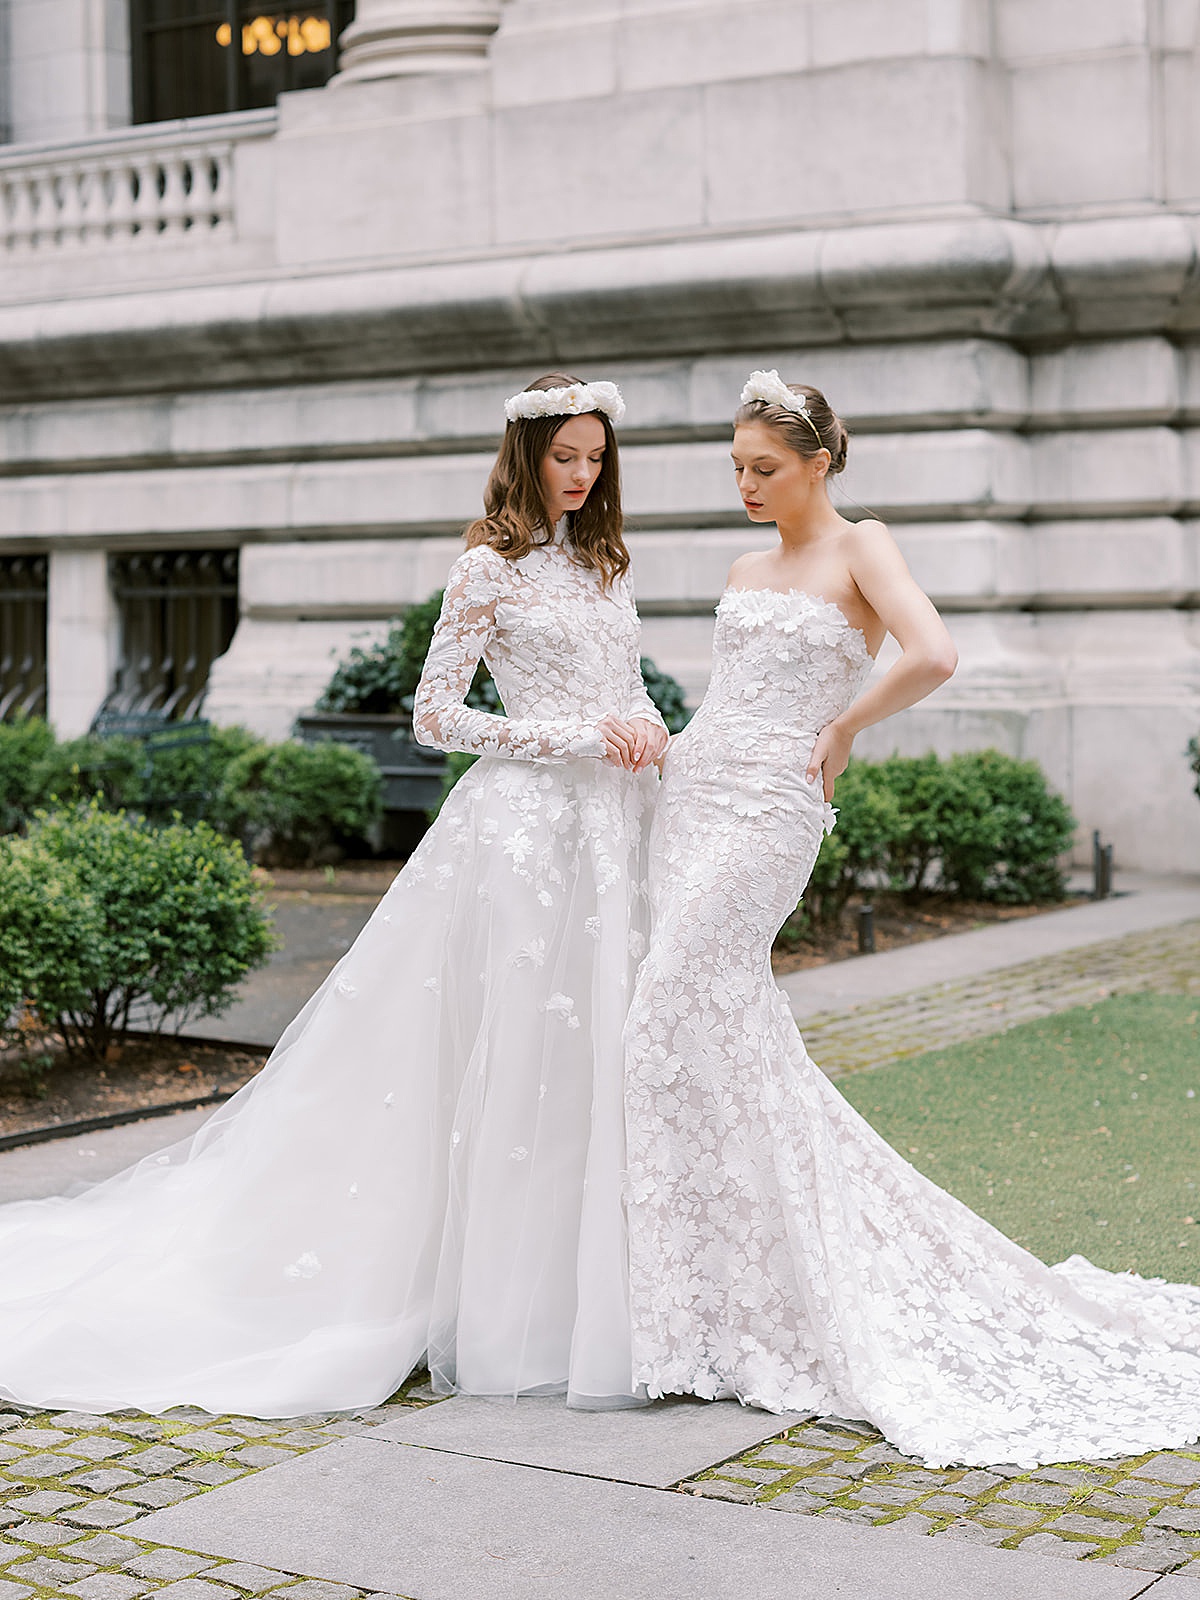 women in chic modern lace wedding dresses pose wearing flower tiaras during Beccar couture lookbook shoot